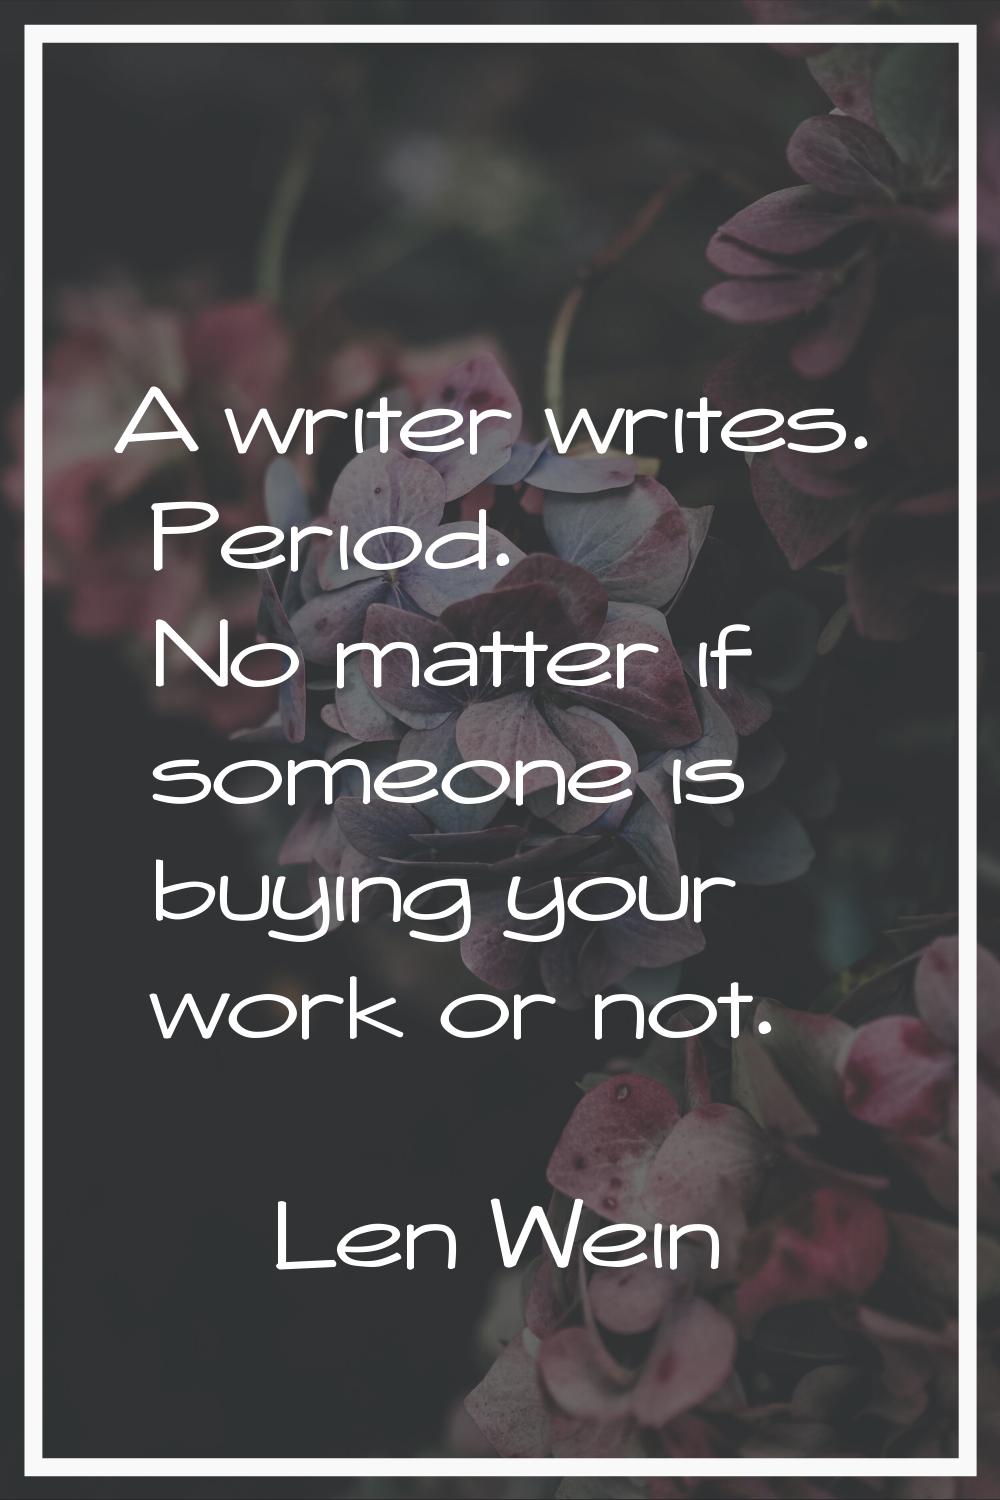 A writer writes. Period. No matter if someone is buying your work or not.